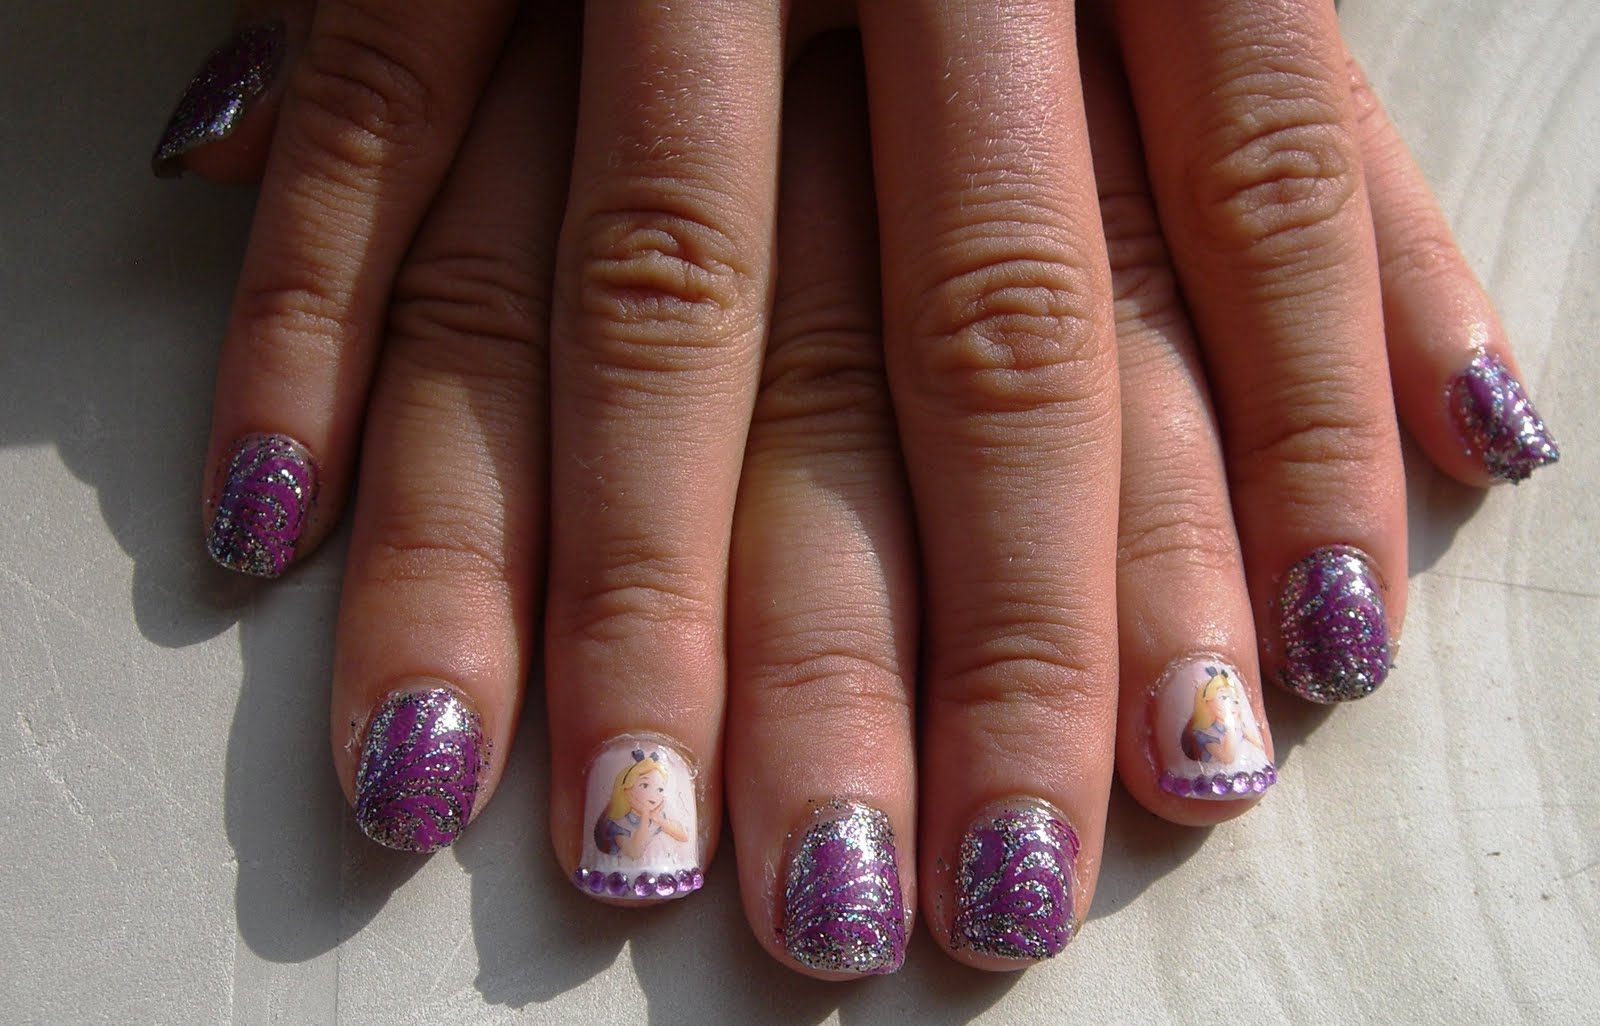 2. Mad Hatter inspired nail art - wide 5